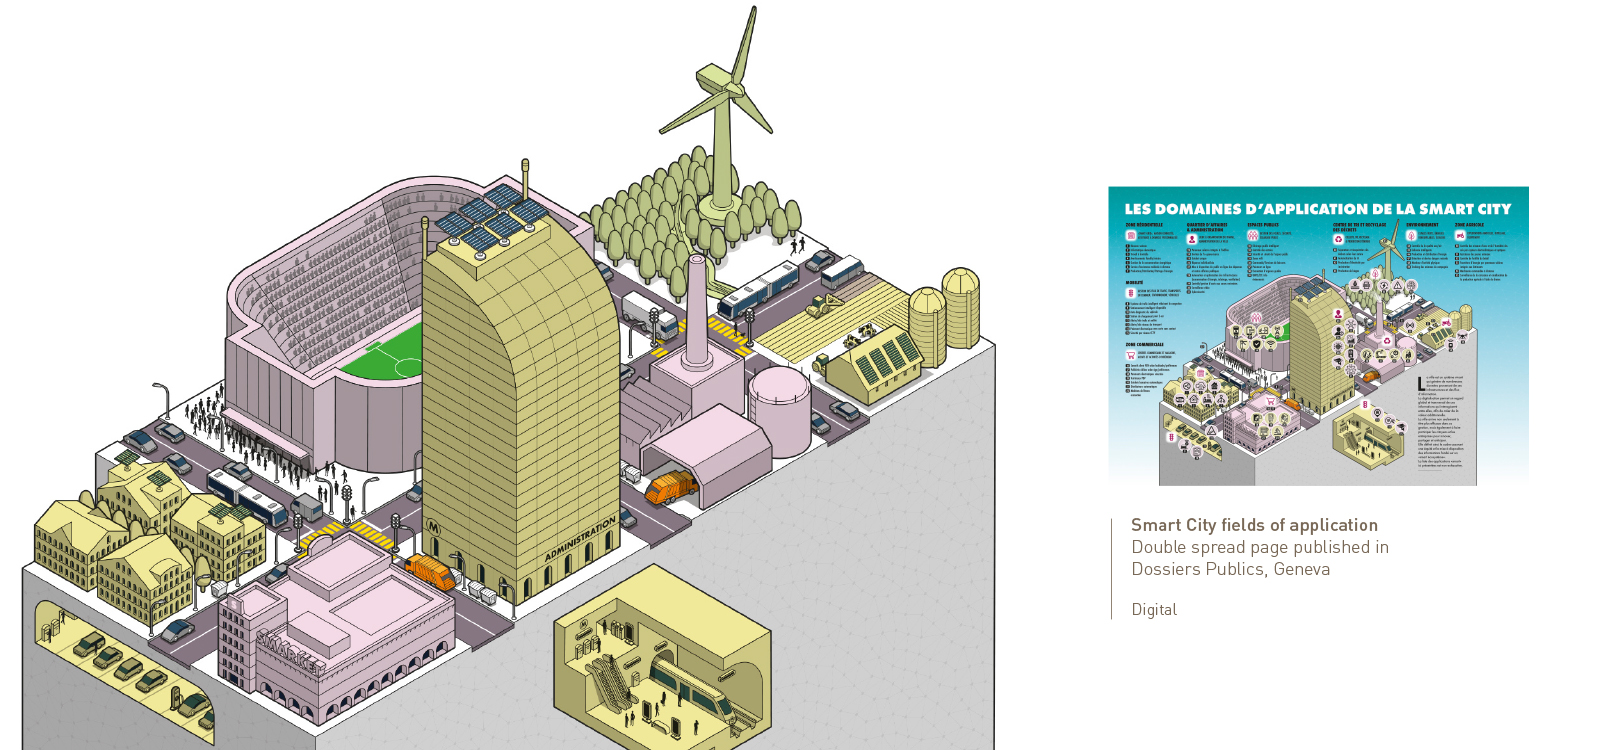 Smart City infographic by Lionel Portier